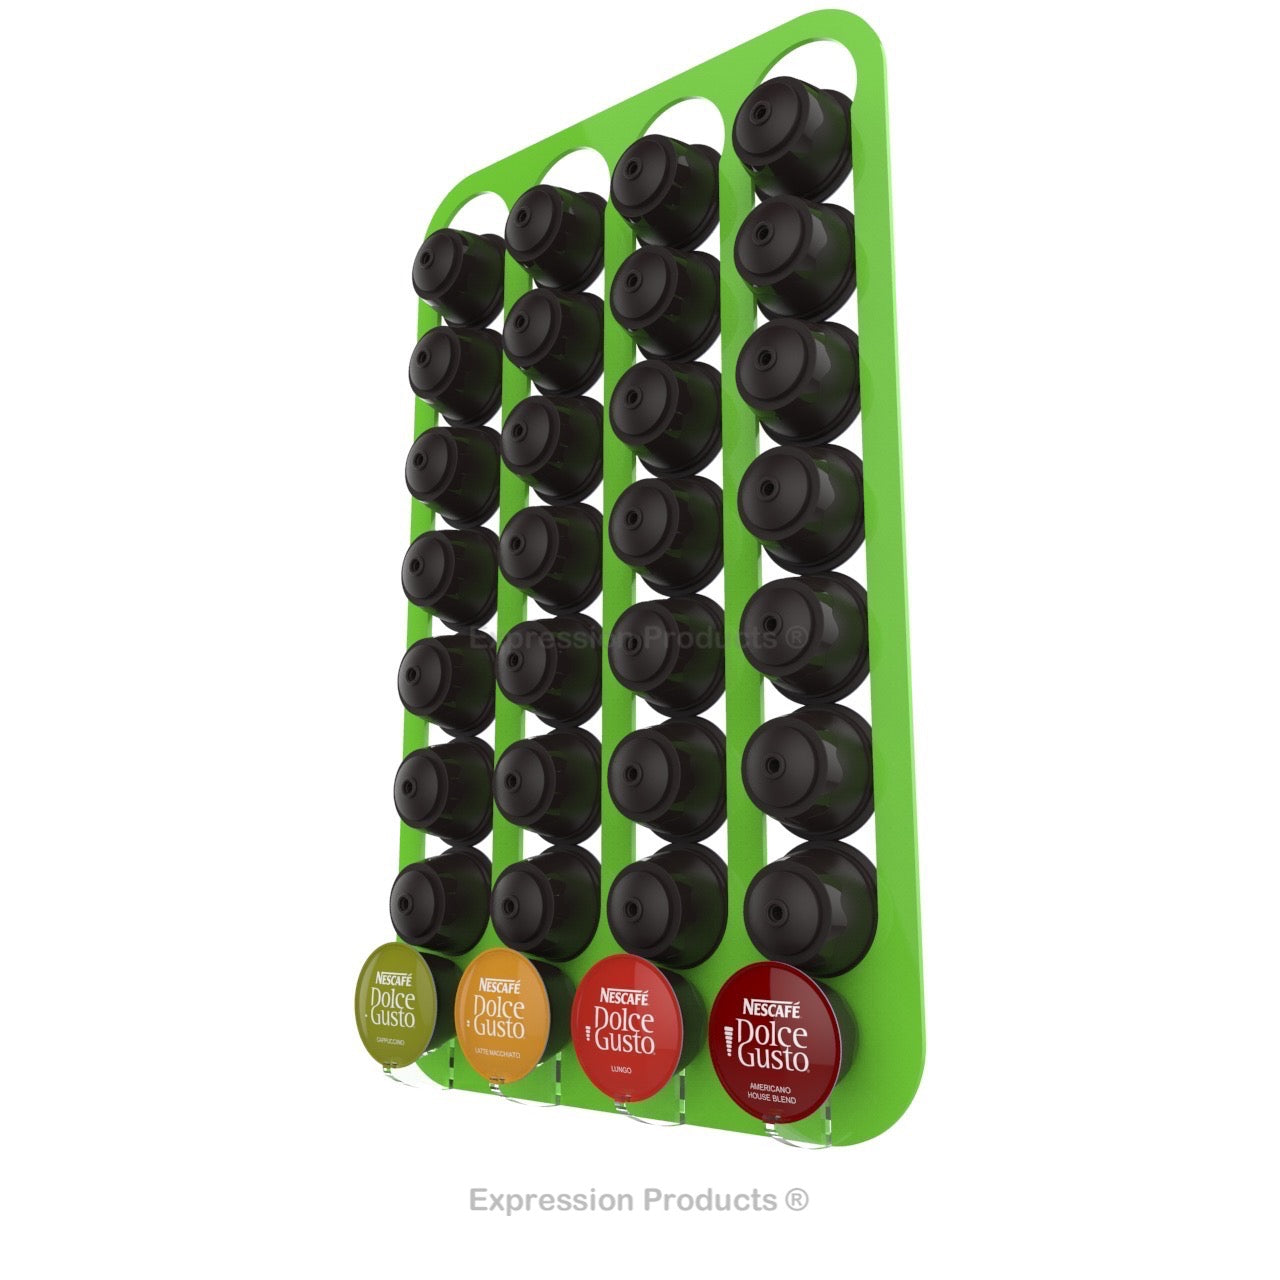 Dolce Gusto Coffee Pod Holder, Wall Mounted.  Shown in Lime Holding 32 Pods